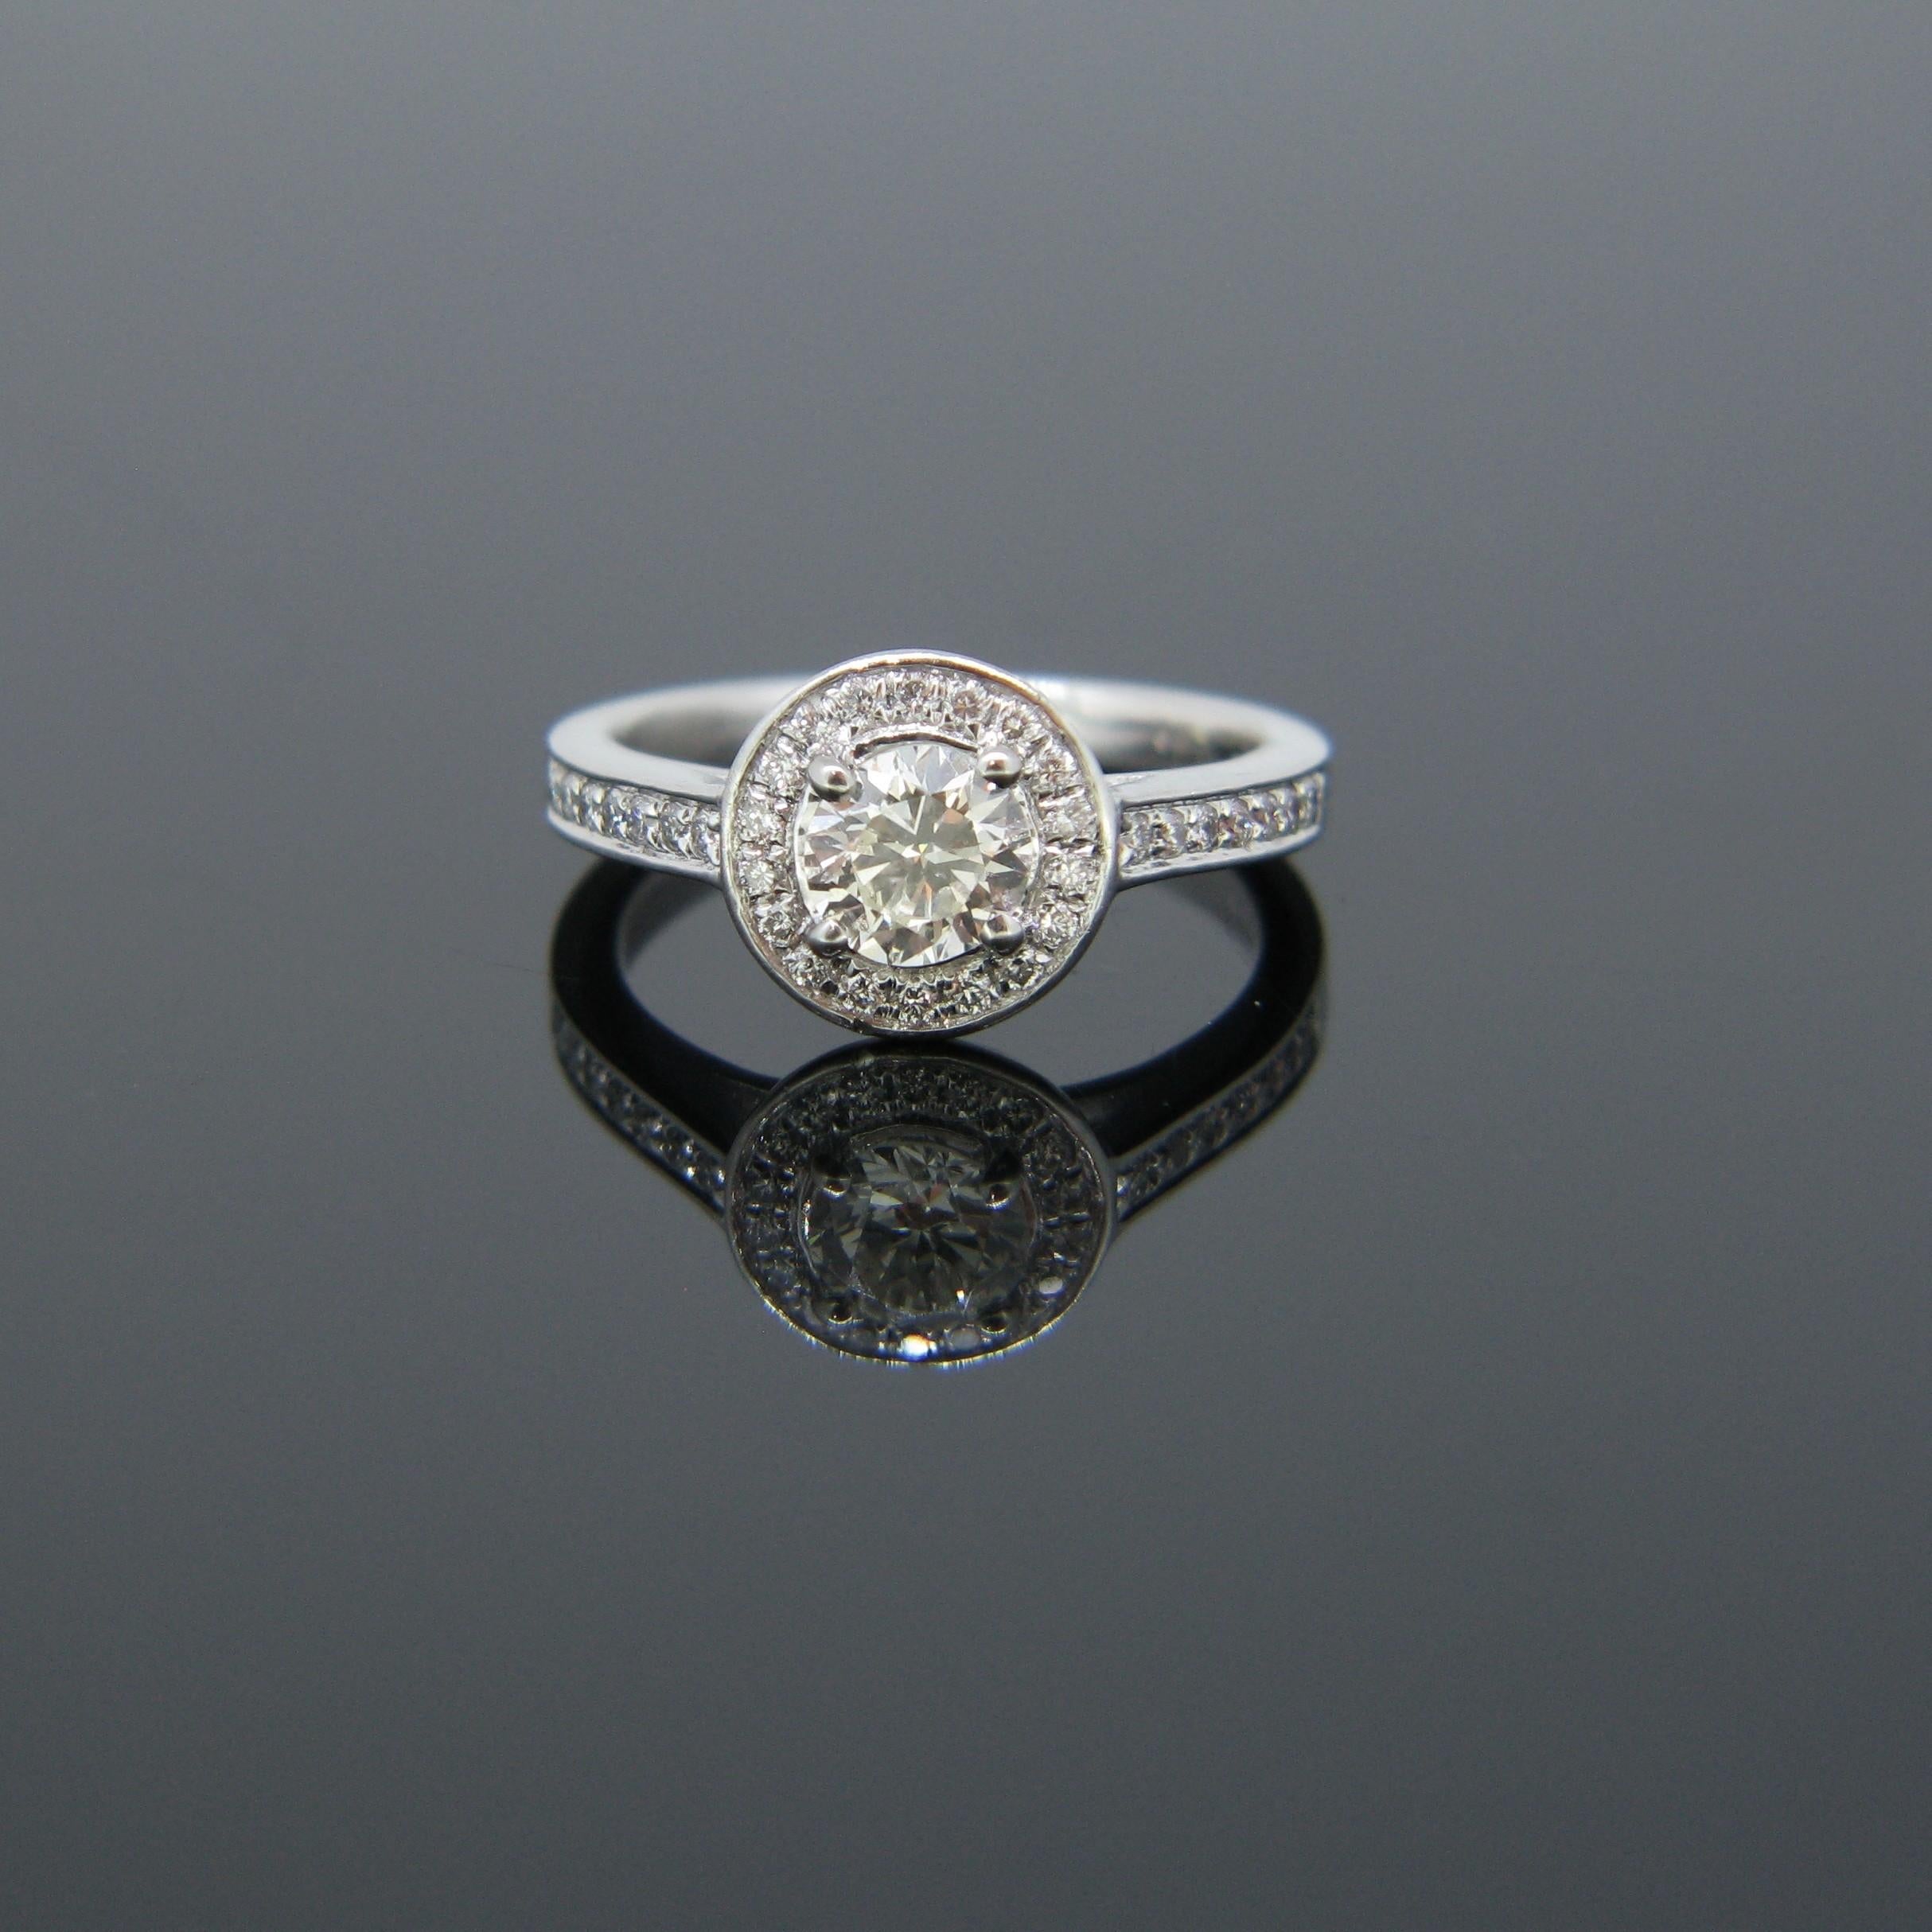 This ring is made in platinum. It is set in its centre with a round brilliant cut diamond weighing 0.63ct with colour K and clarity VS1. It is surrounded and adorned on each side with brilliant cut diamonds with a total carat weight of 0.27ct. It is